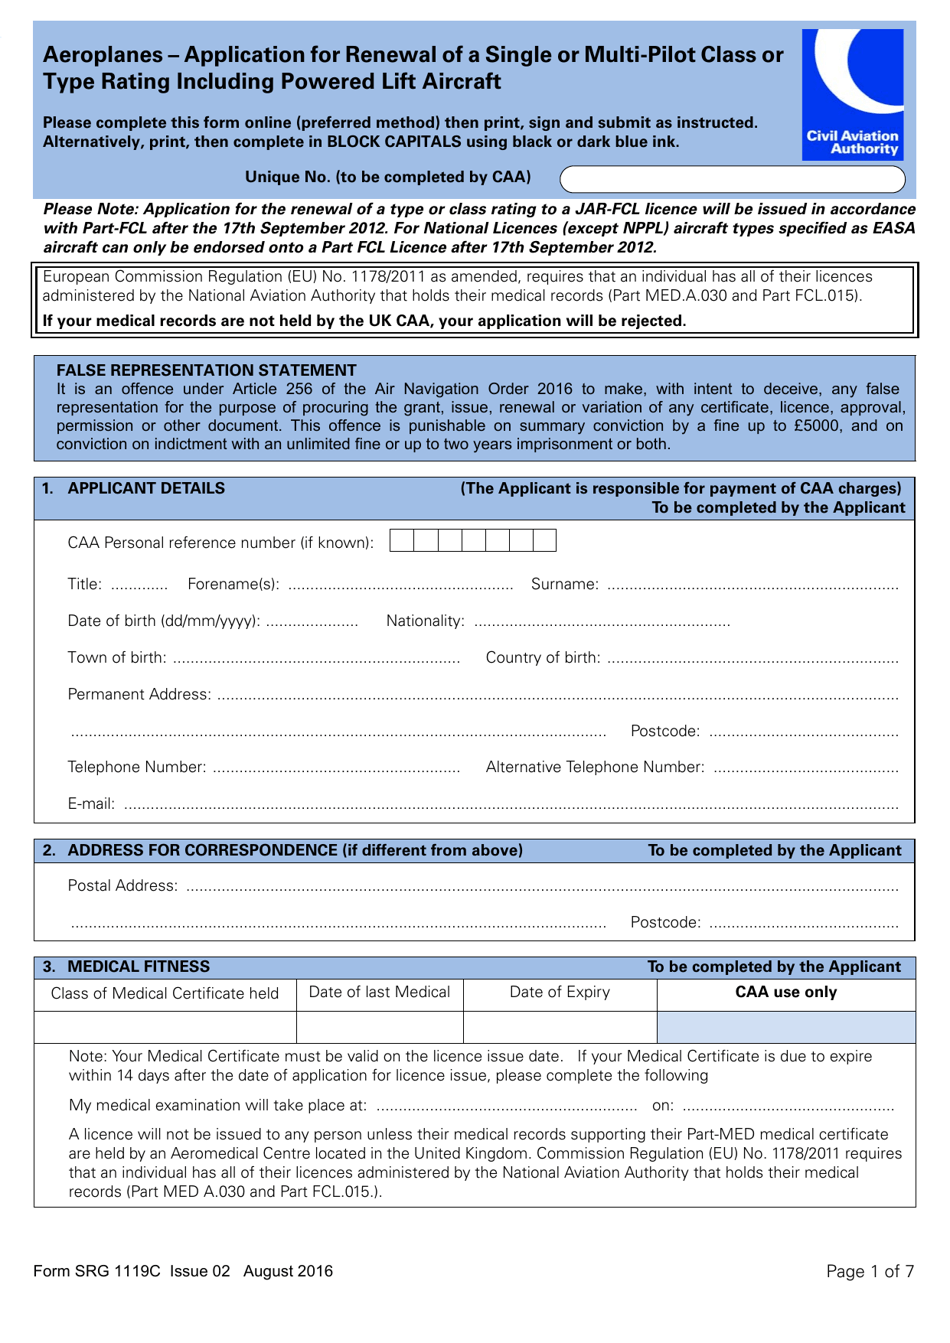 Form SRG1119C Aeroplanes - Application for Renewal of a Single or Multi-Pilot Class or Type Rating Including Powered Lift Aircraft - United Kingdom, Page 1